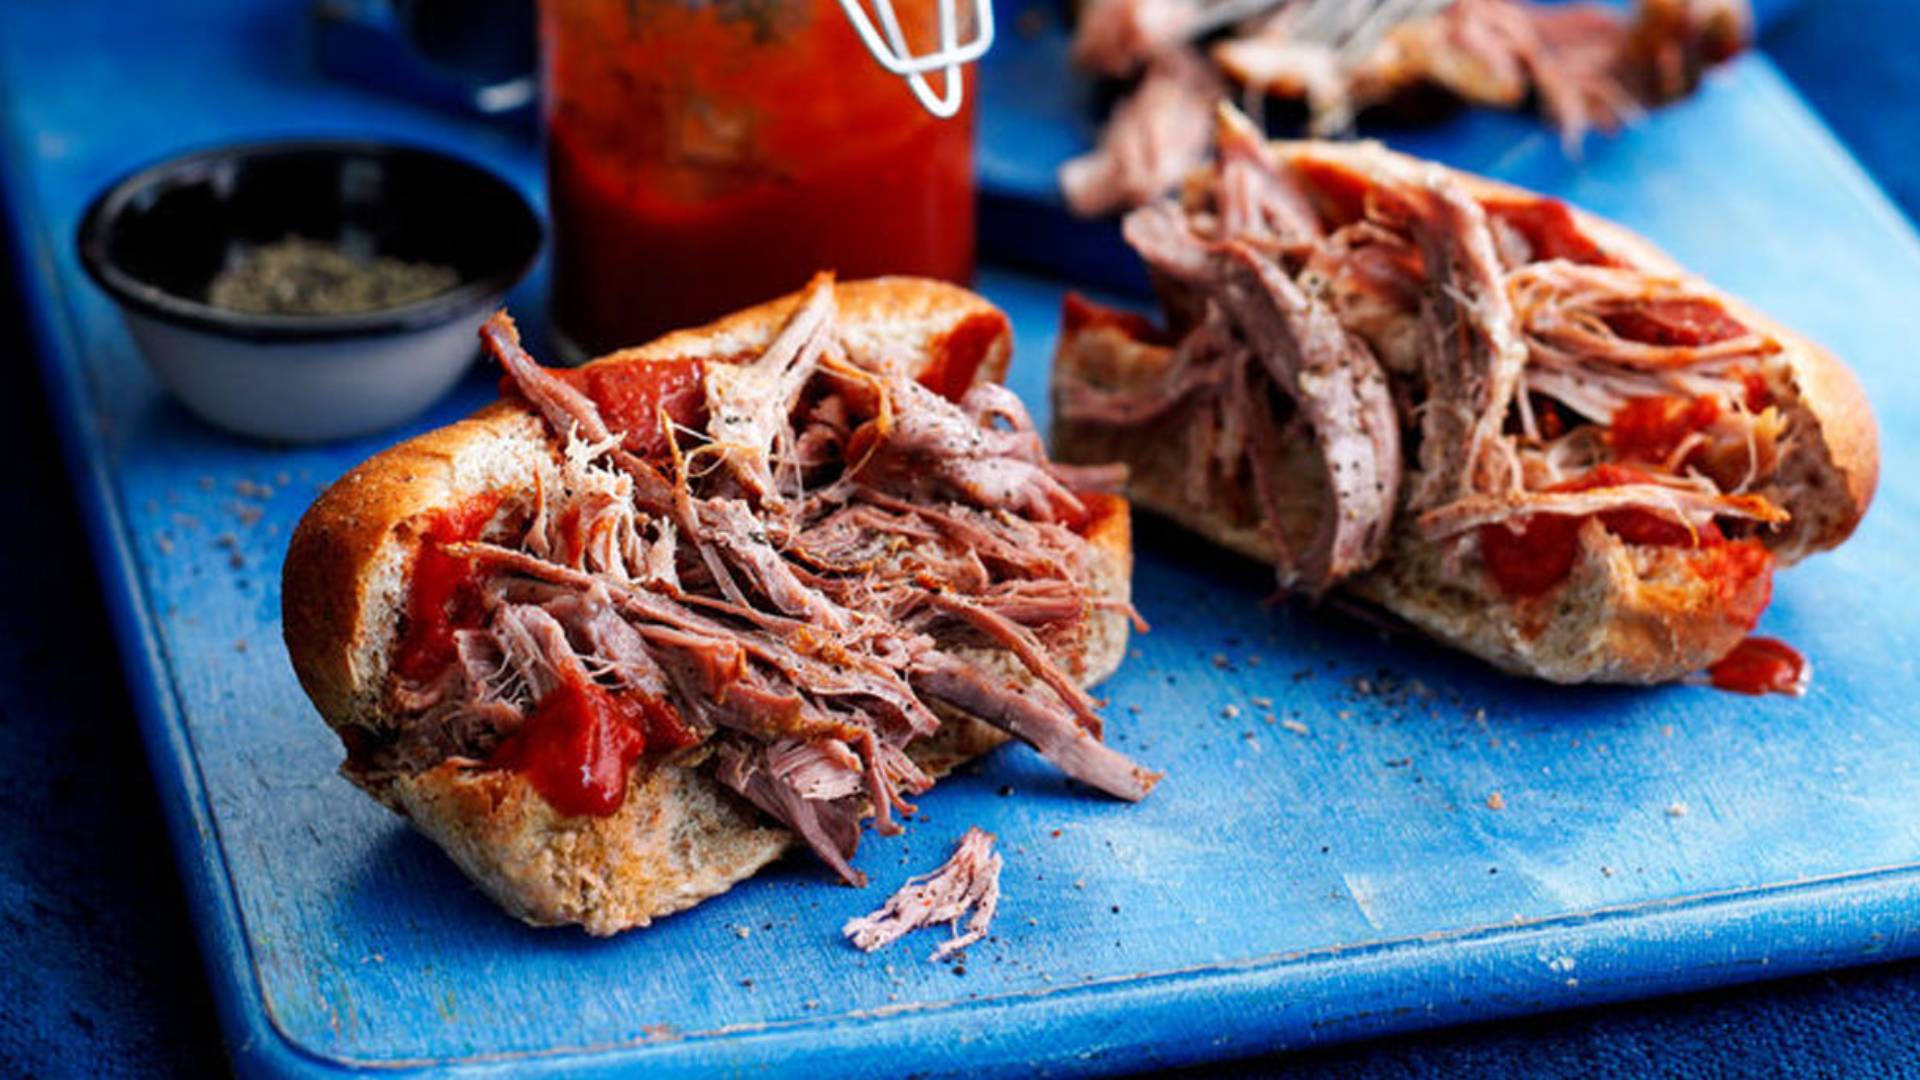 North Carolina woman dialed 911 and complained that her pulled pork was ‘undercooked’